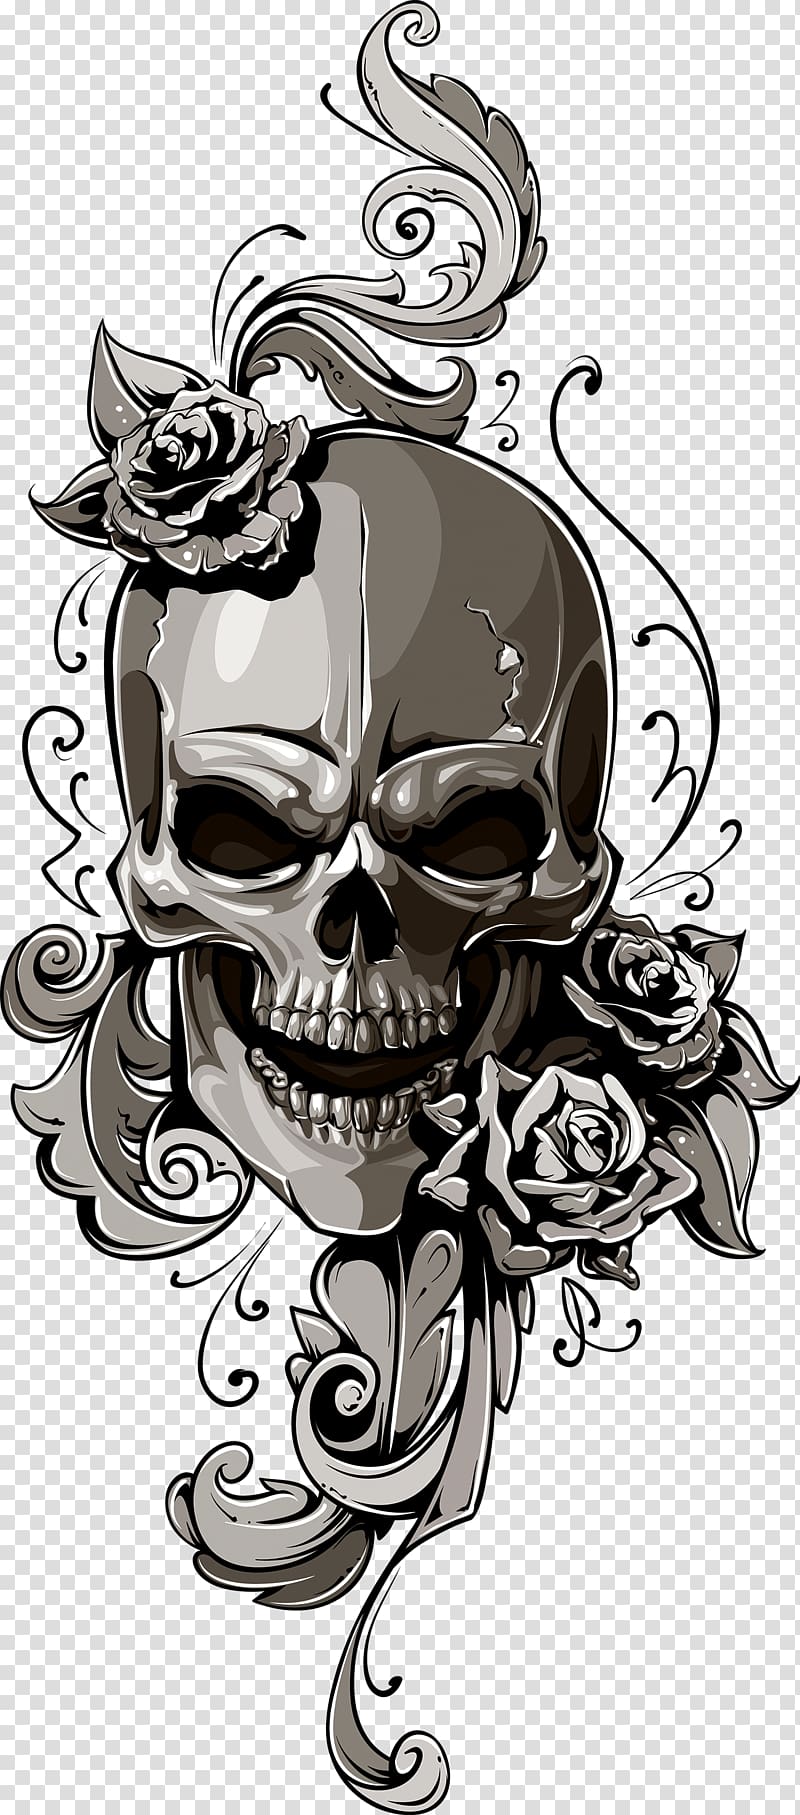 Skull Tattoo transparent background PNG cliparts free download | HiClipart